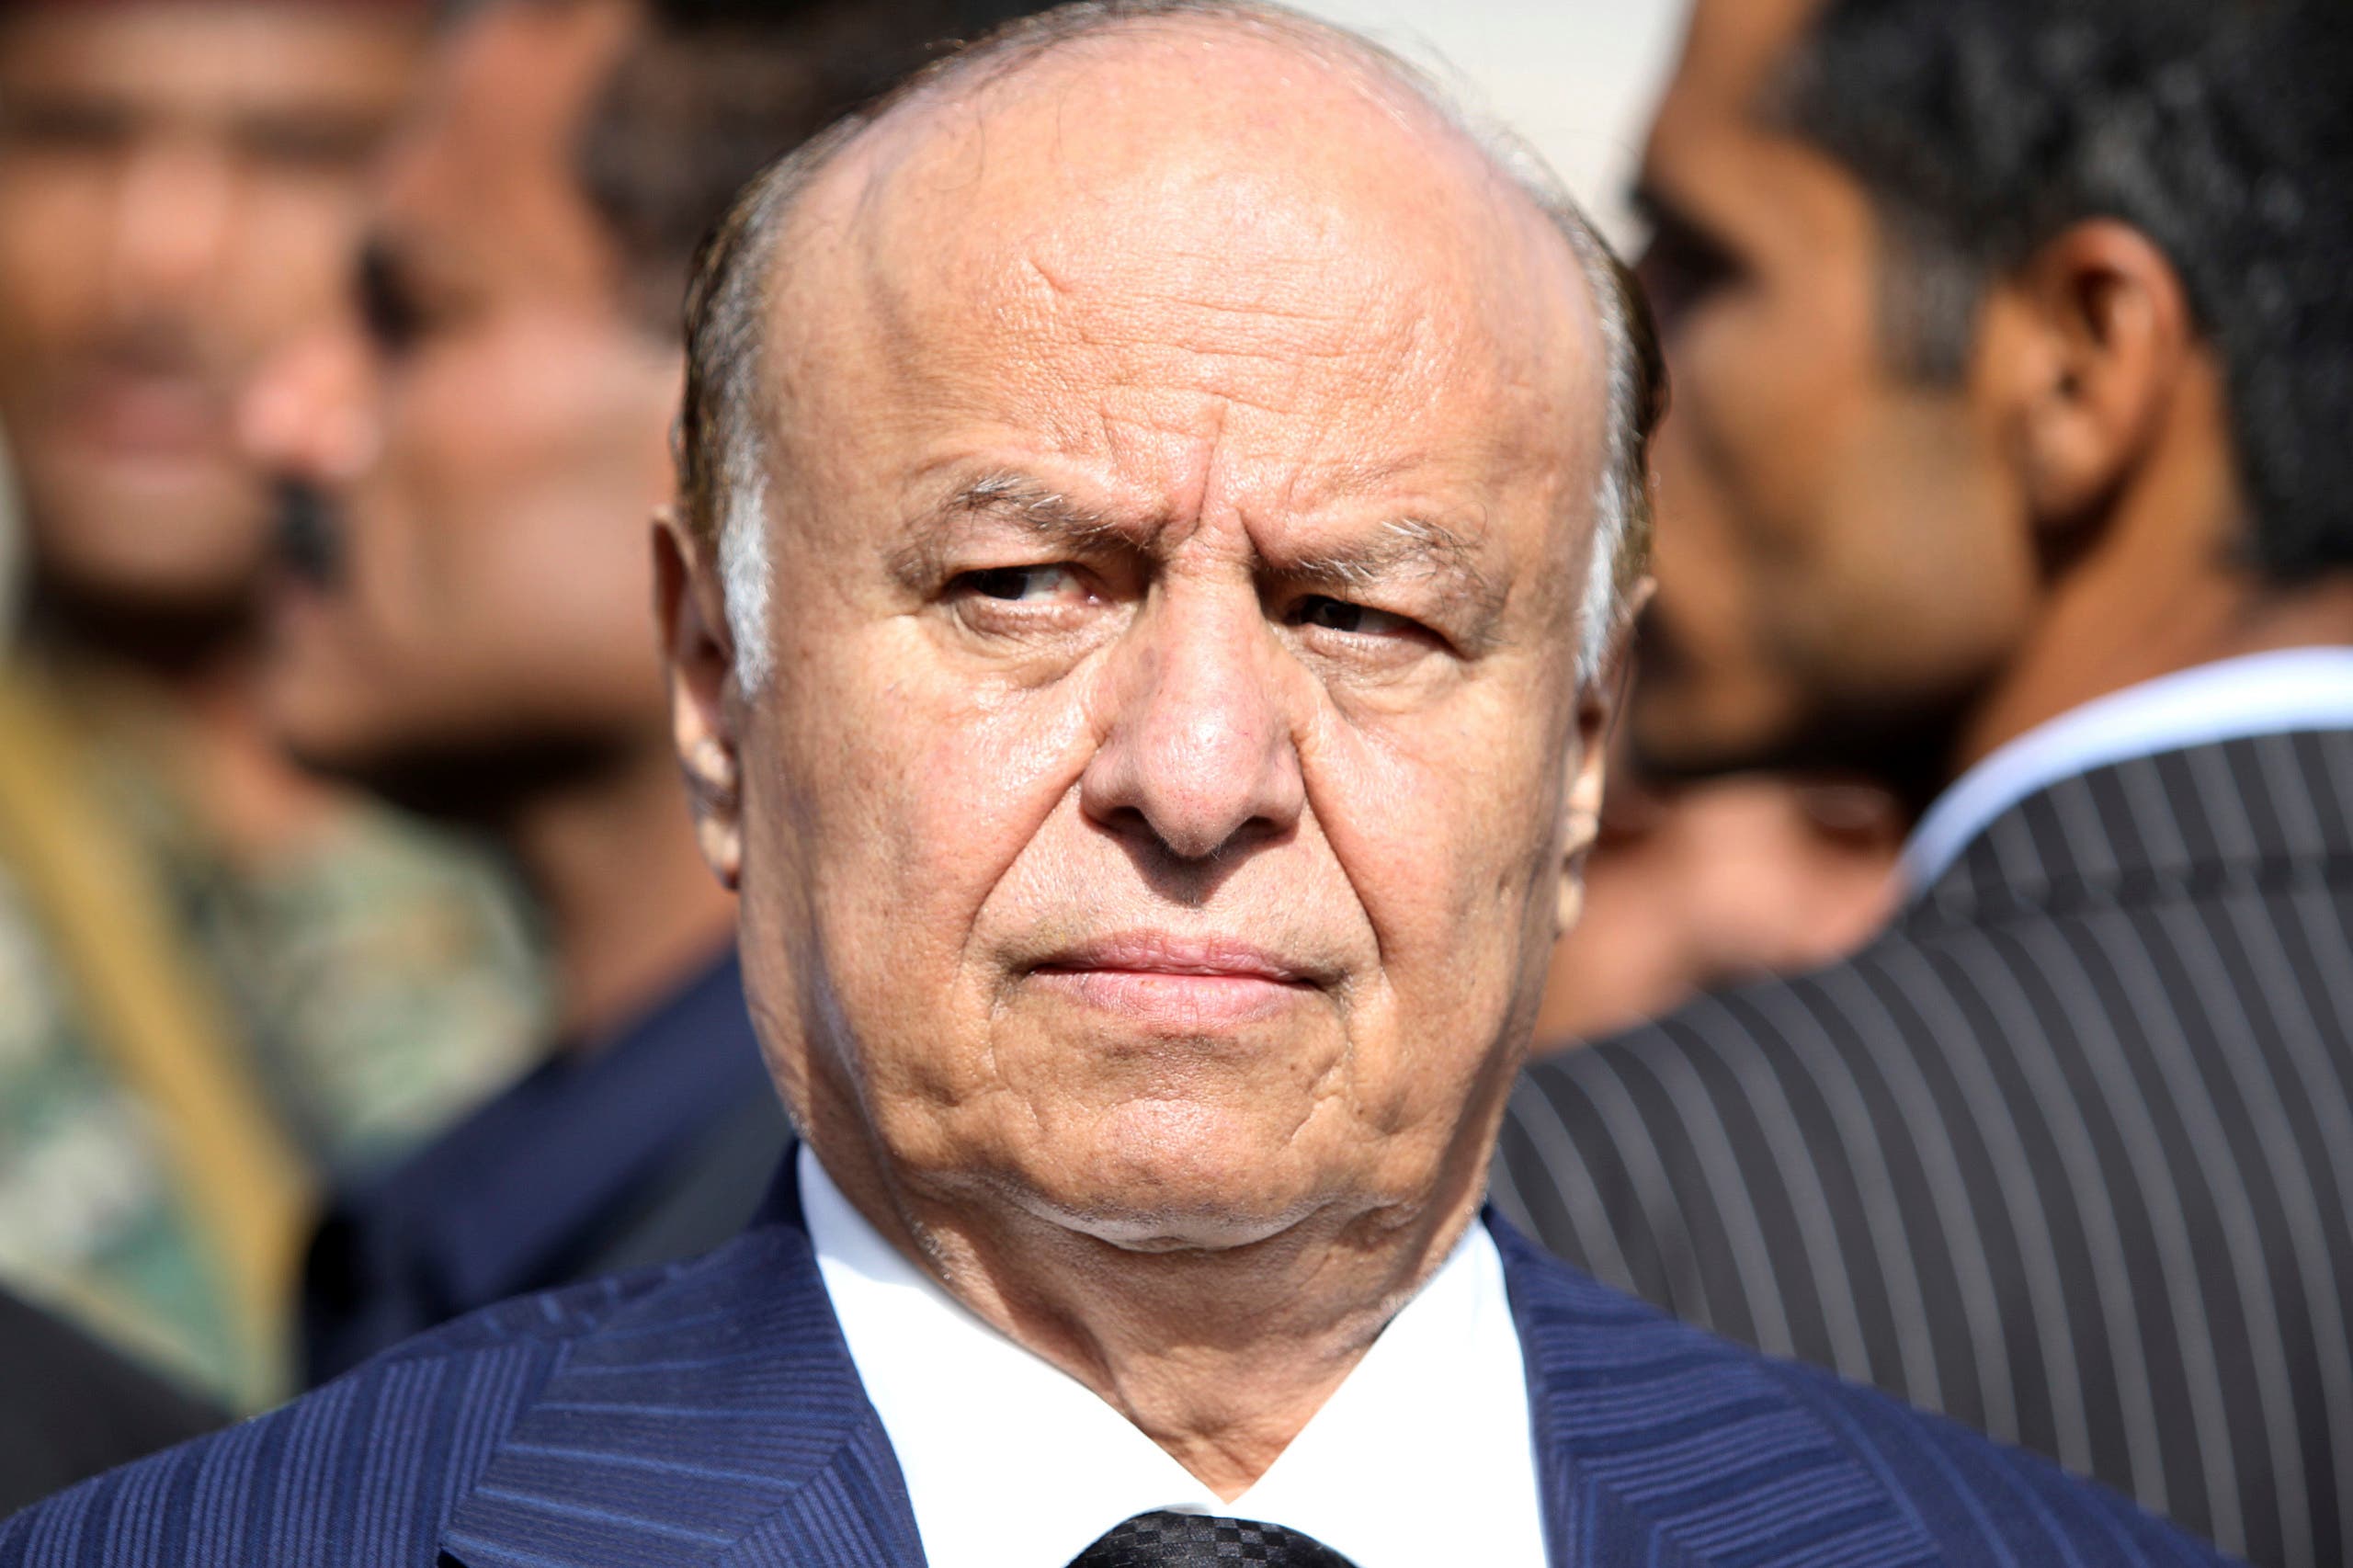 Yemeni President Abed Rabbo Mansour Hadi looks on during a funeral service for Major General Salem Ali Qatan, the commander of military forces in the south of Yemen, in Sanaa June 19, 2012. (File photo: Reuters)